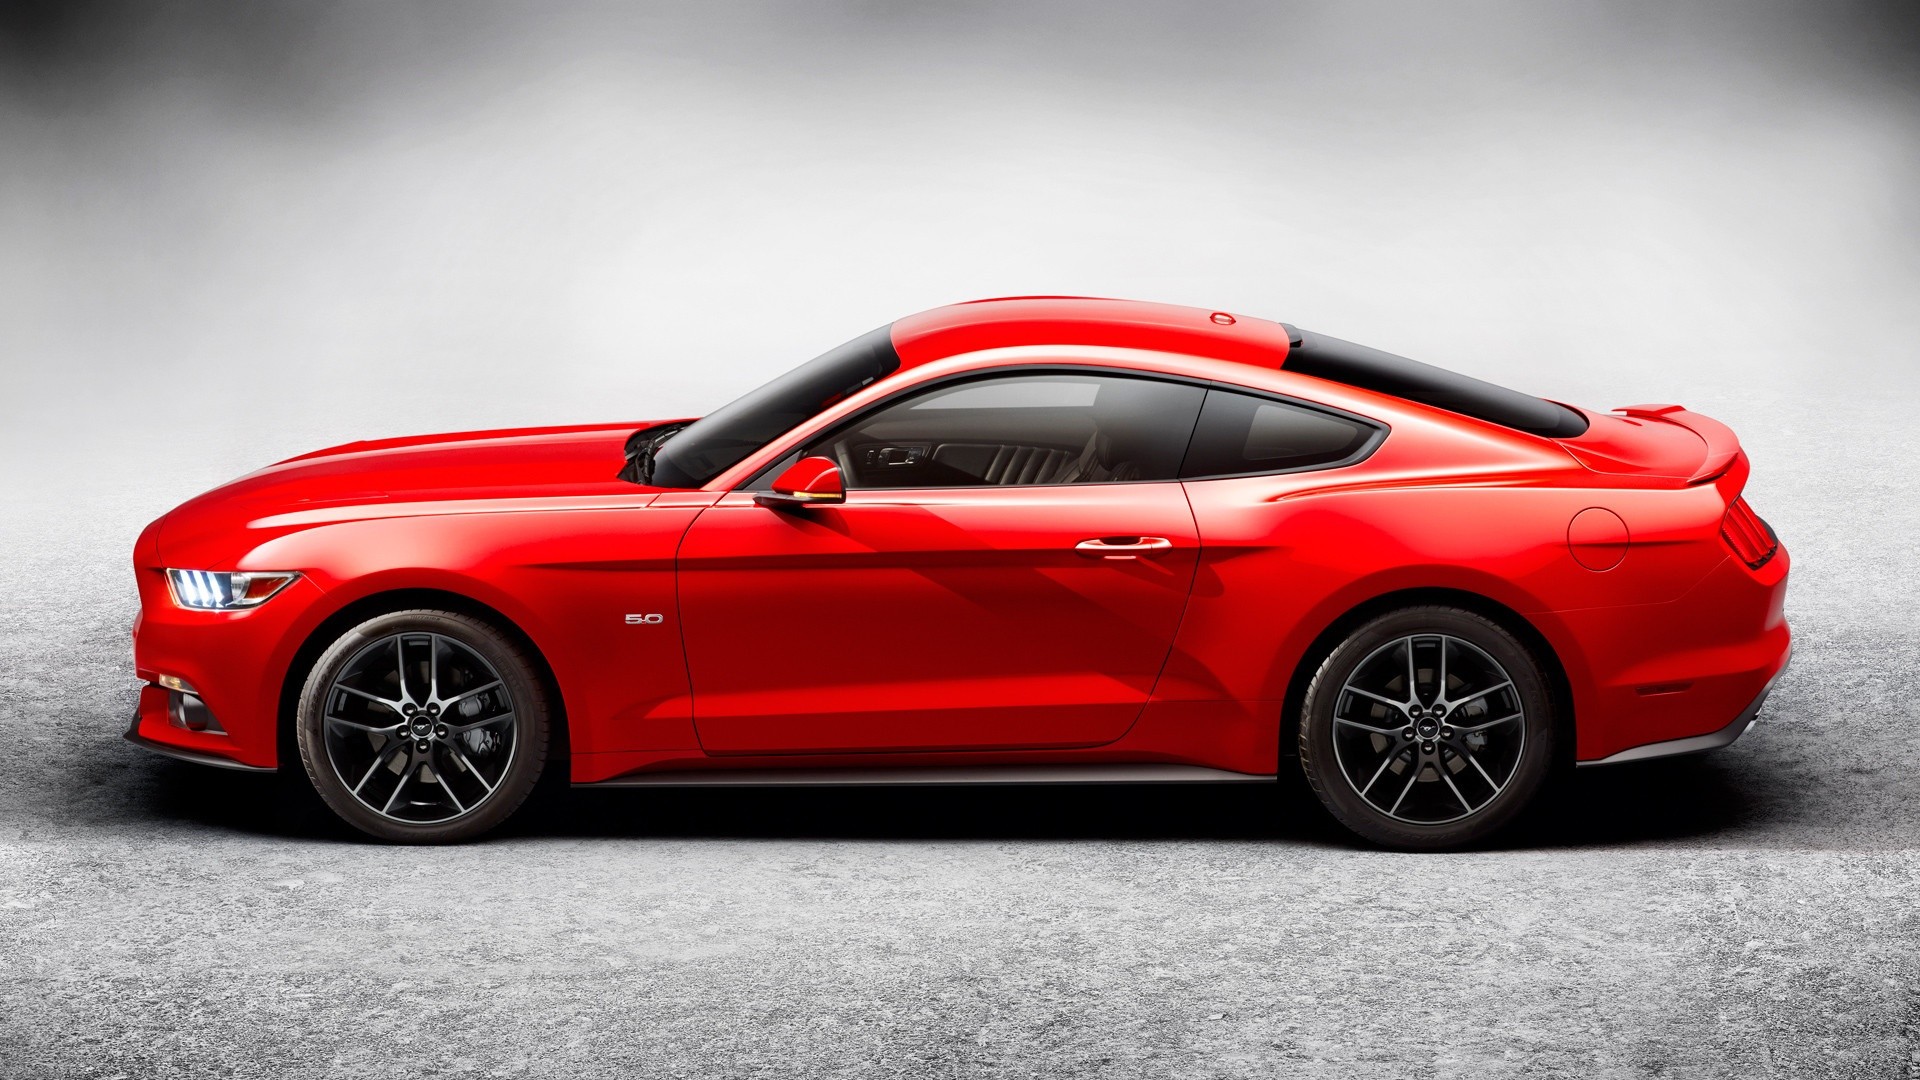 1920x1080 Ford-Mustang-Wallpapers-for-Desktop